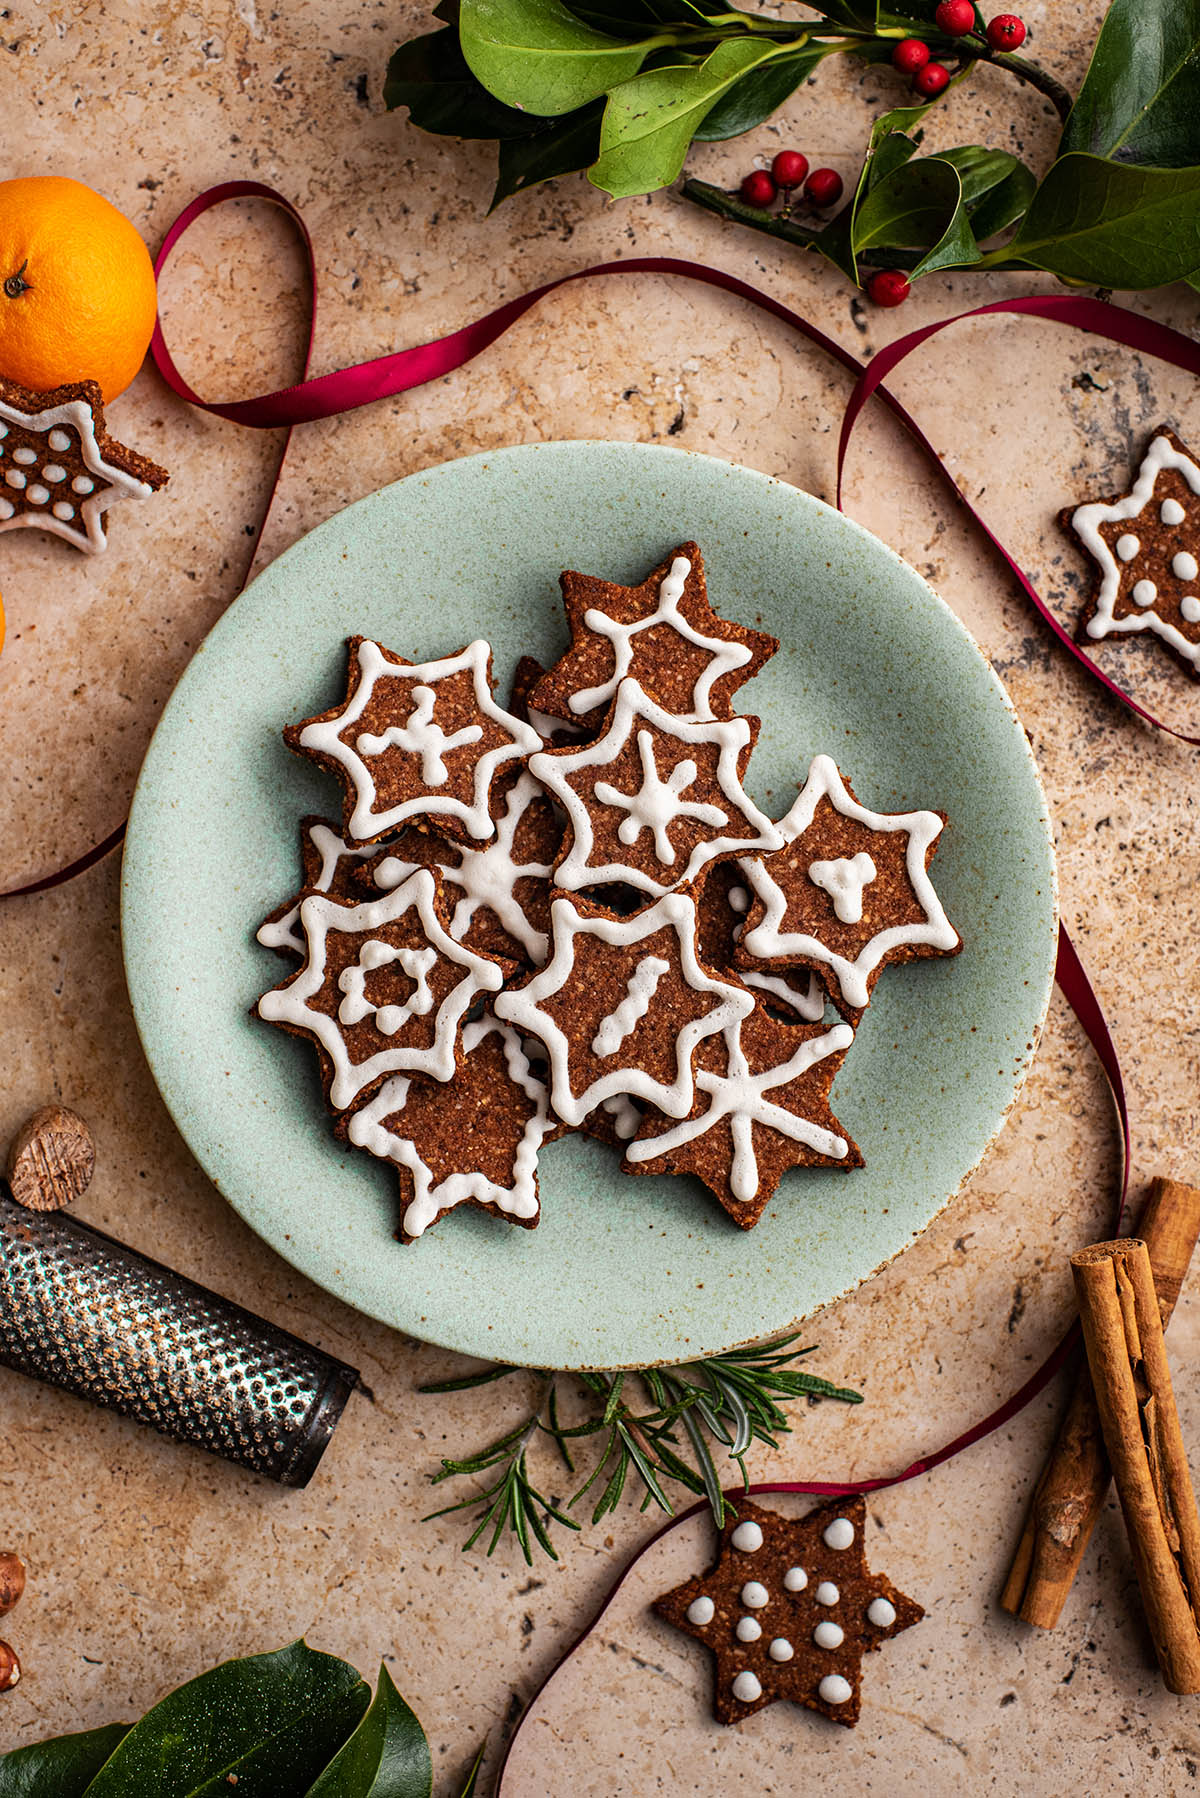 A plate of cookies surrounded with spices, oranges, ribbon, and greenery.